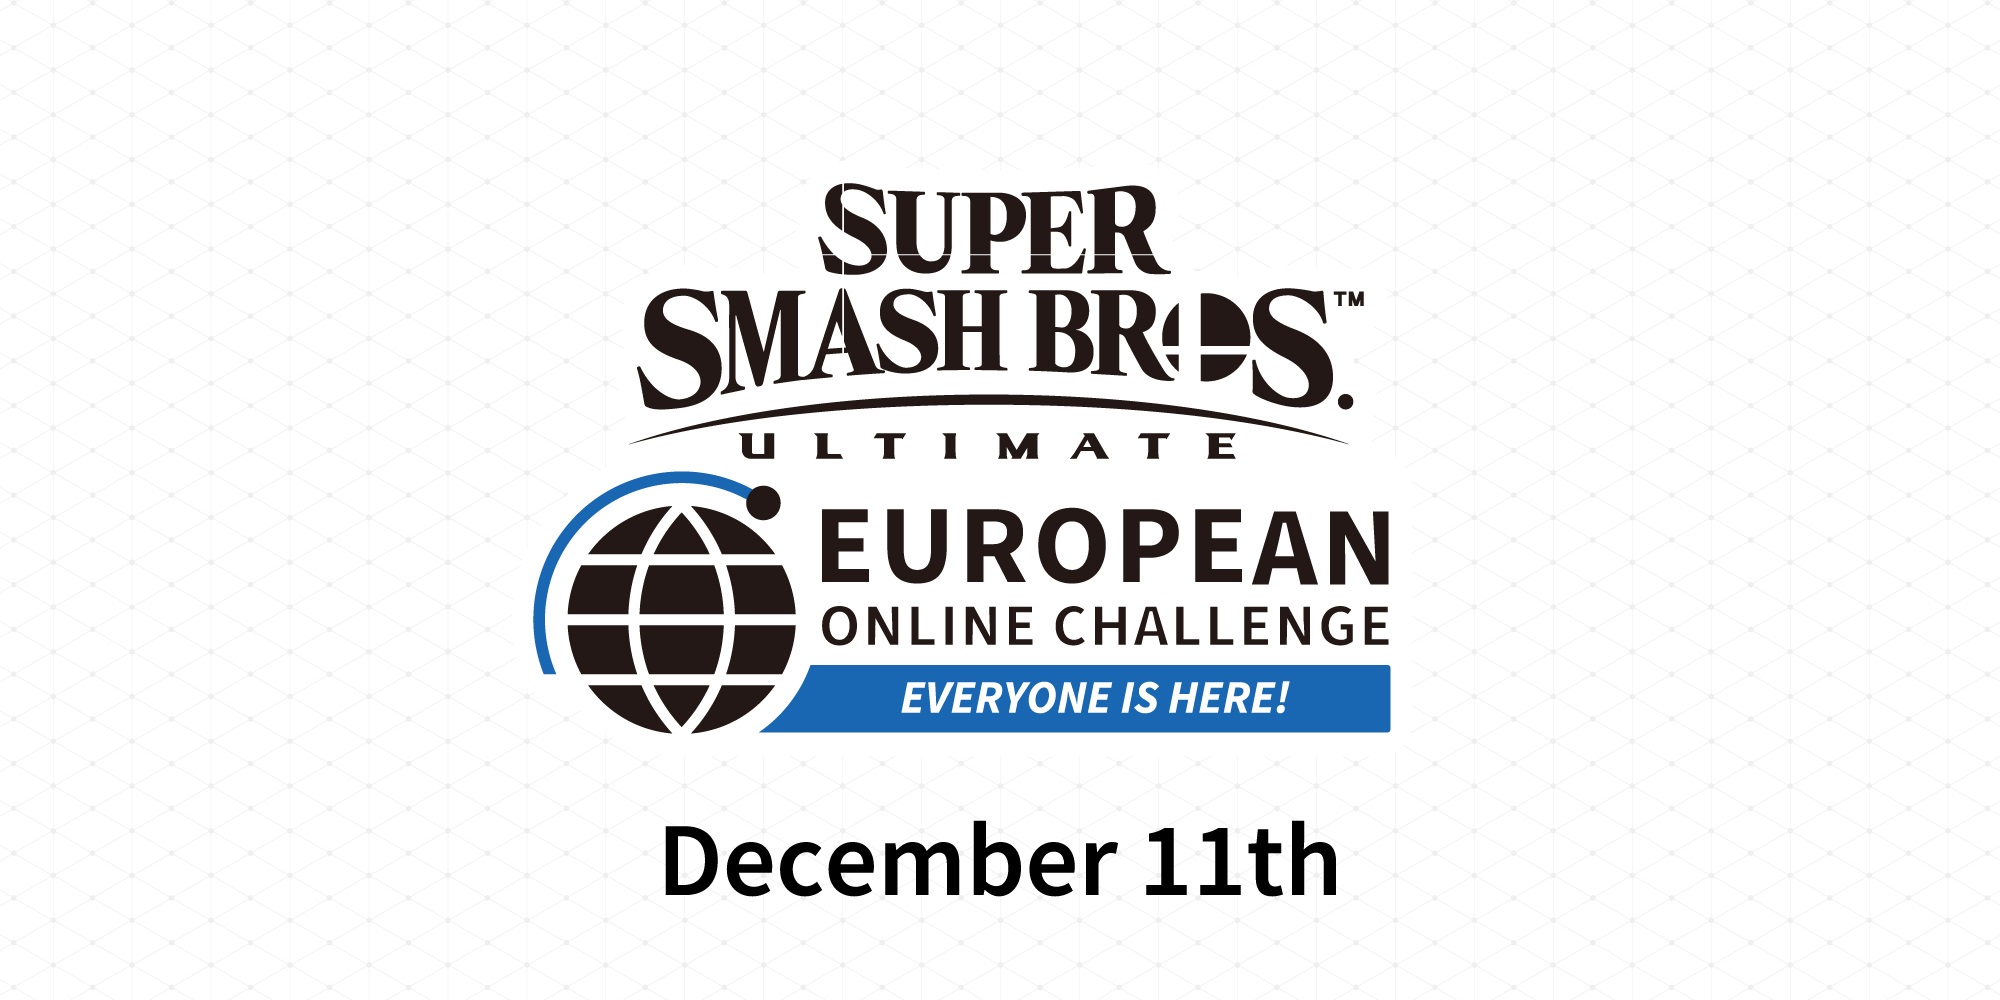 Over 100,000 Gold Points up for grabs in our Super Smash Bros. Ultimate European Online Challenge